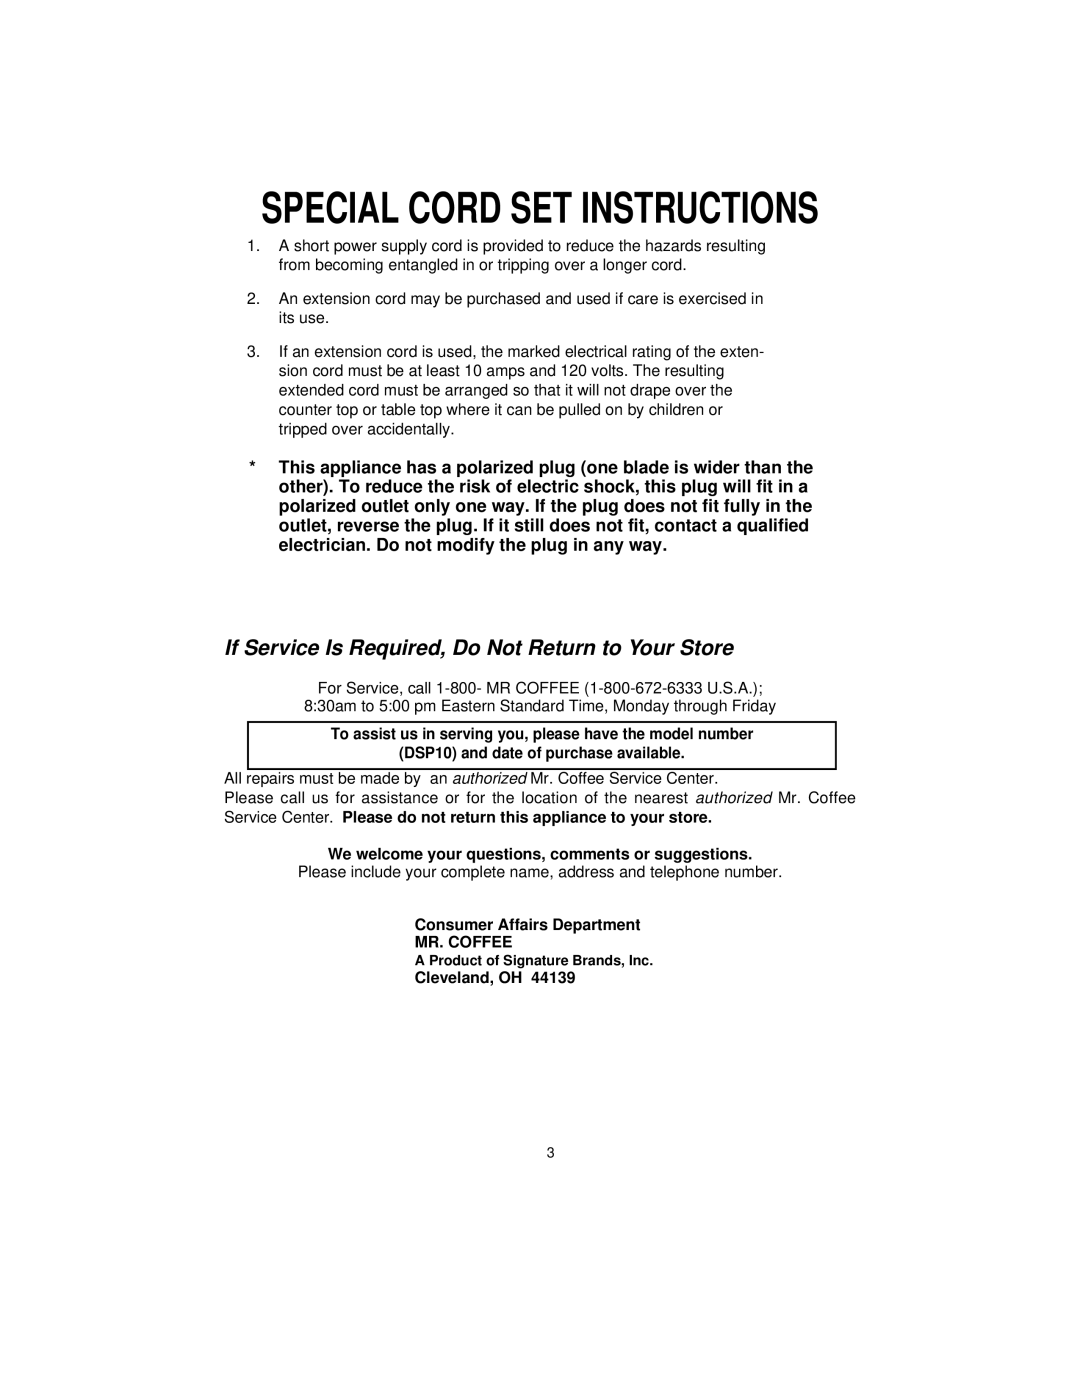 Mr. Coffee Special Cord Set Instructions, DSP10 and date of purchase available, Consumer Affairs Department MR. COFFEE 